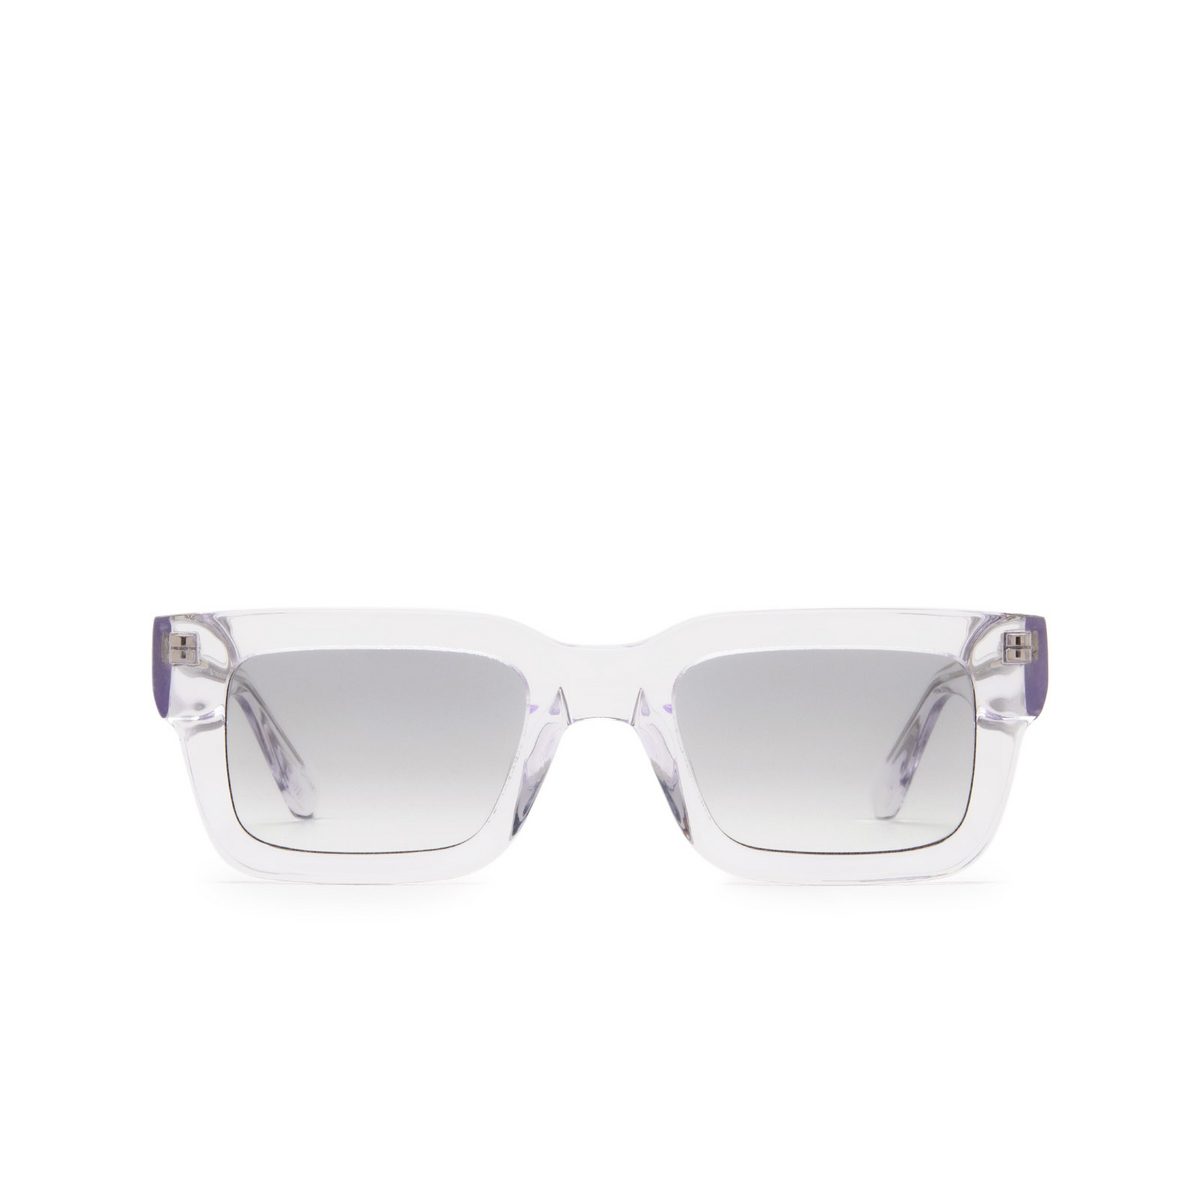 Chimi 05 Sunglasses CLEAR - front view